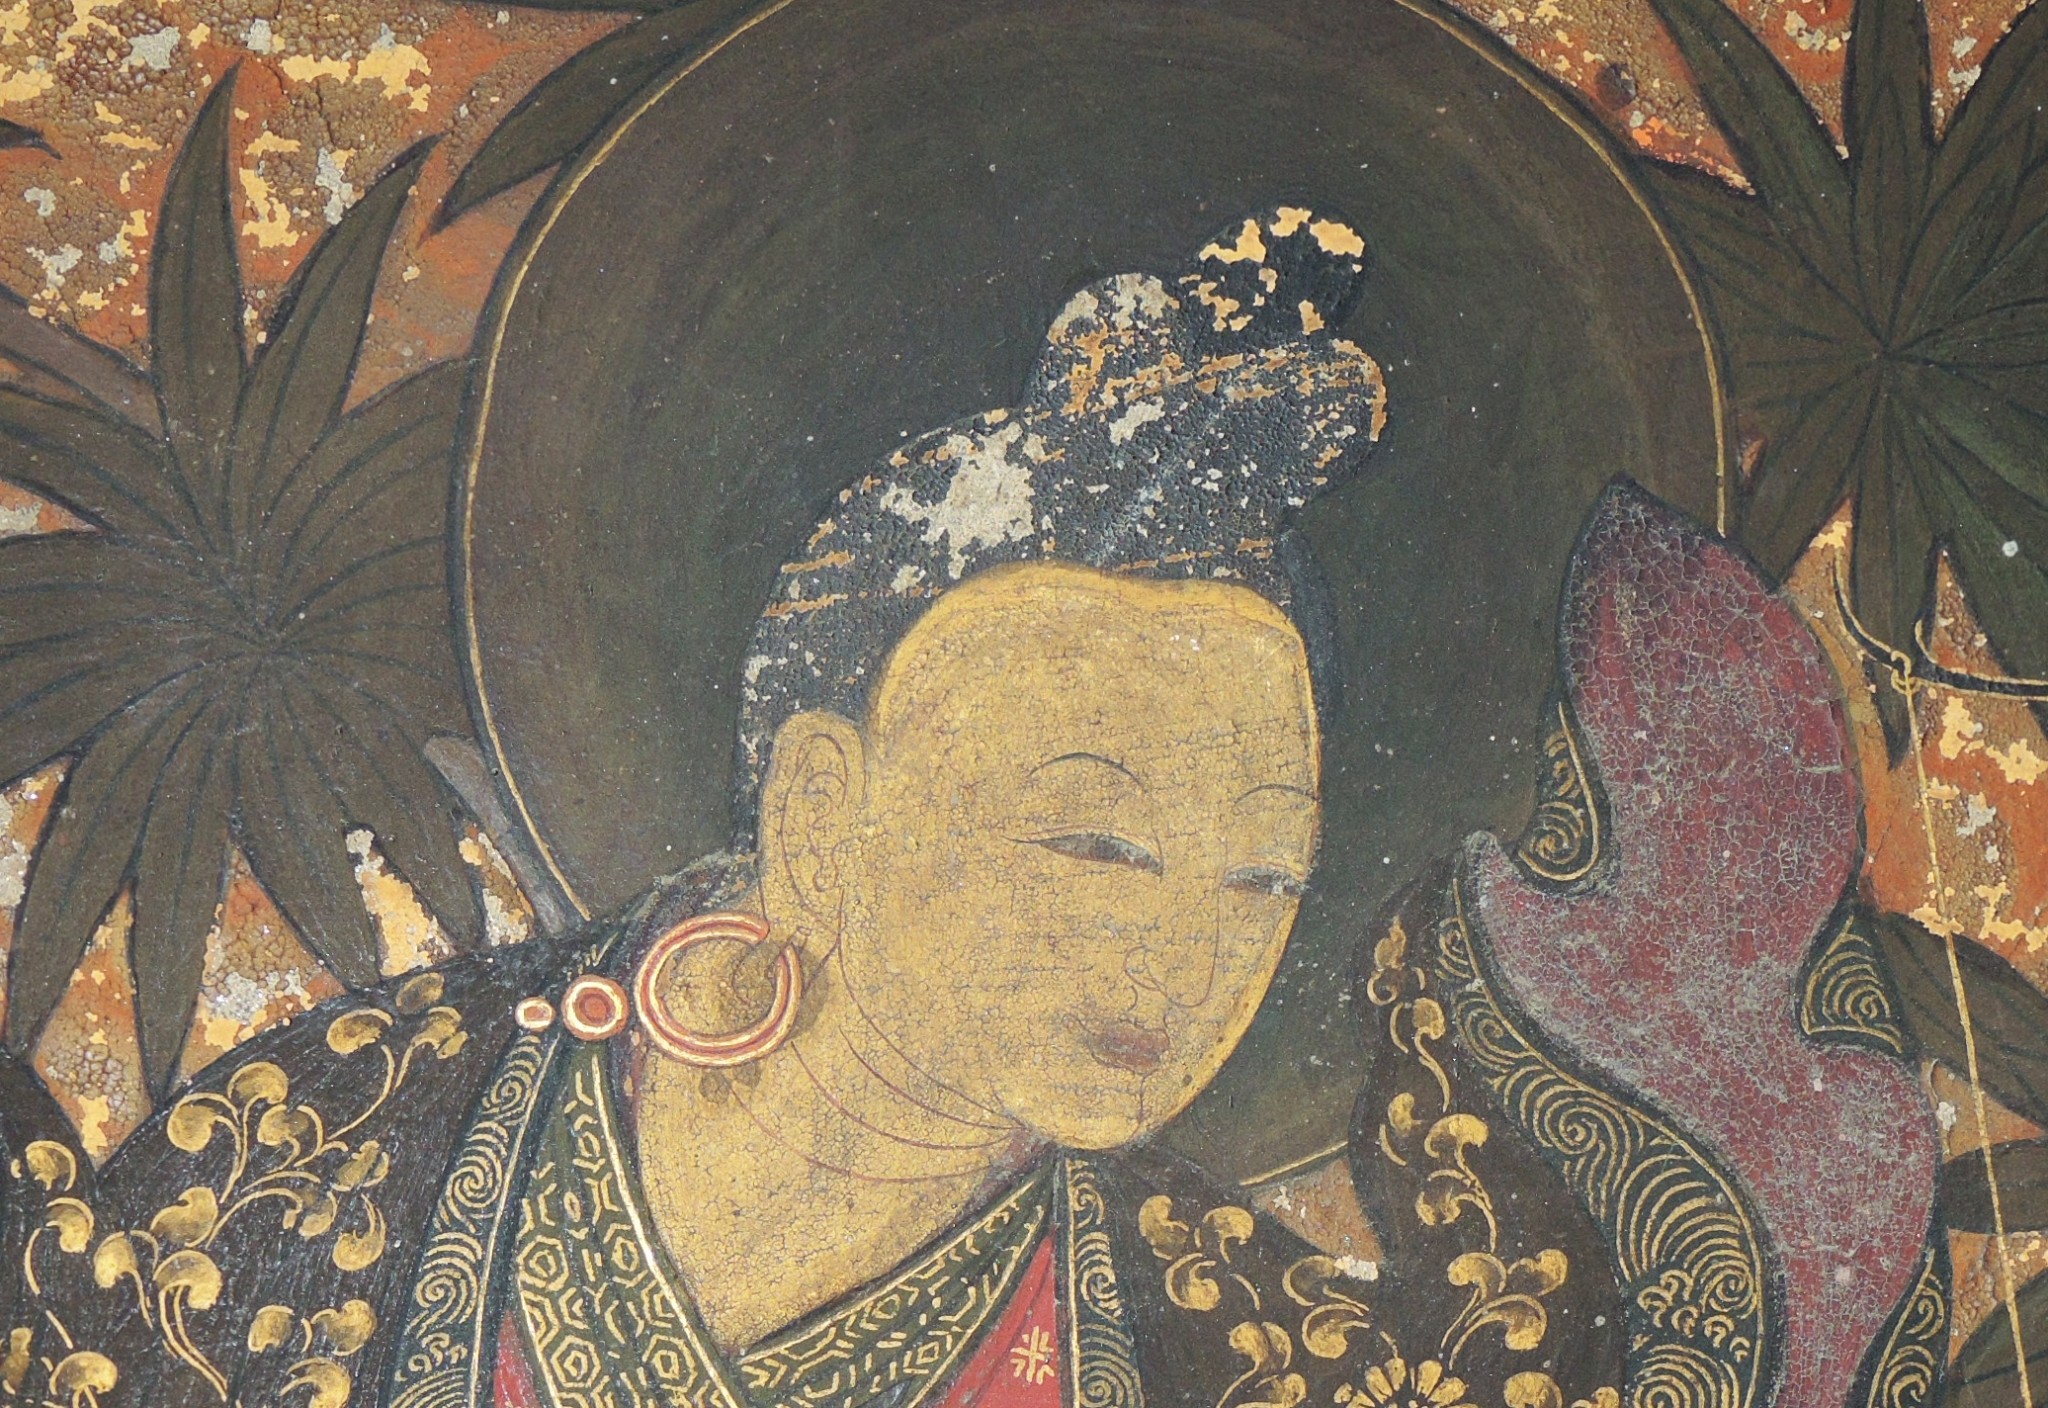 MA Buddhist Art: History and Conservation - The Courtauld Institute ...